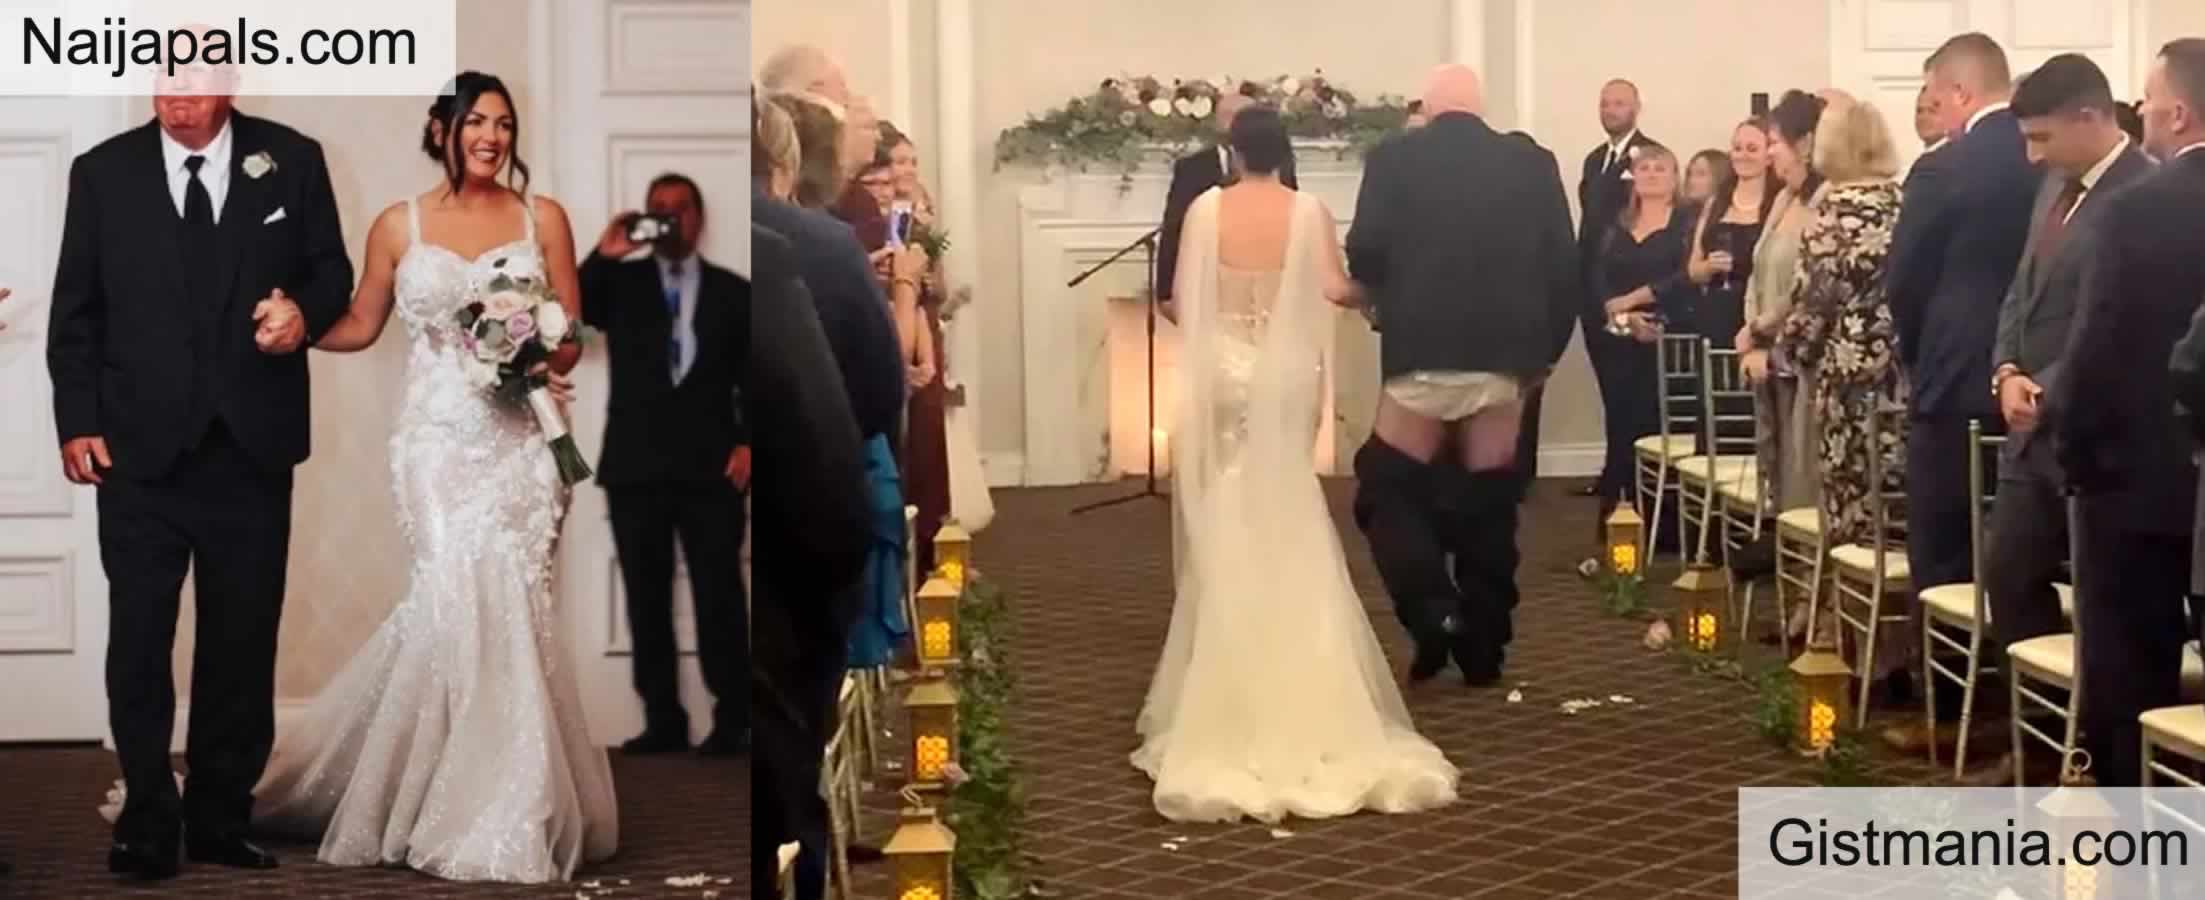 Embarassing Moment When Father's Pants Fell Down While He Was Walking Daughter Down The Aisle